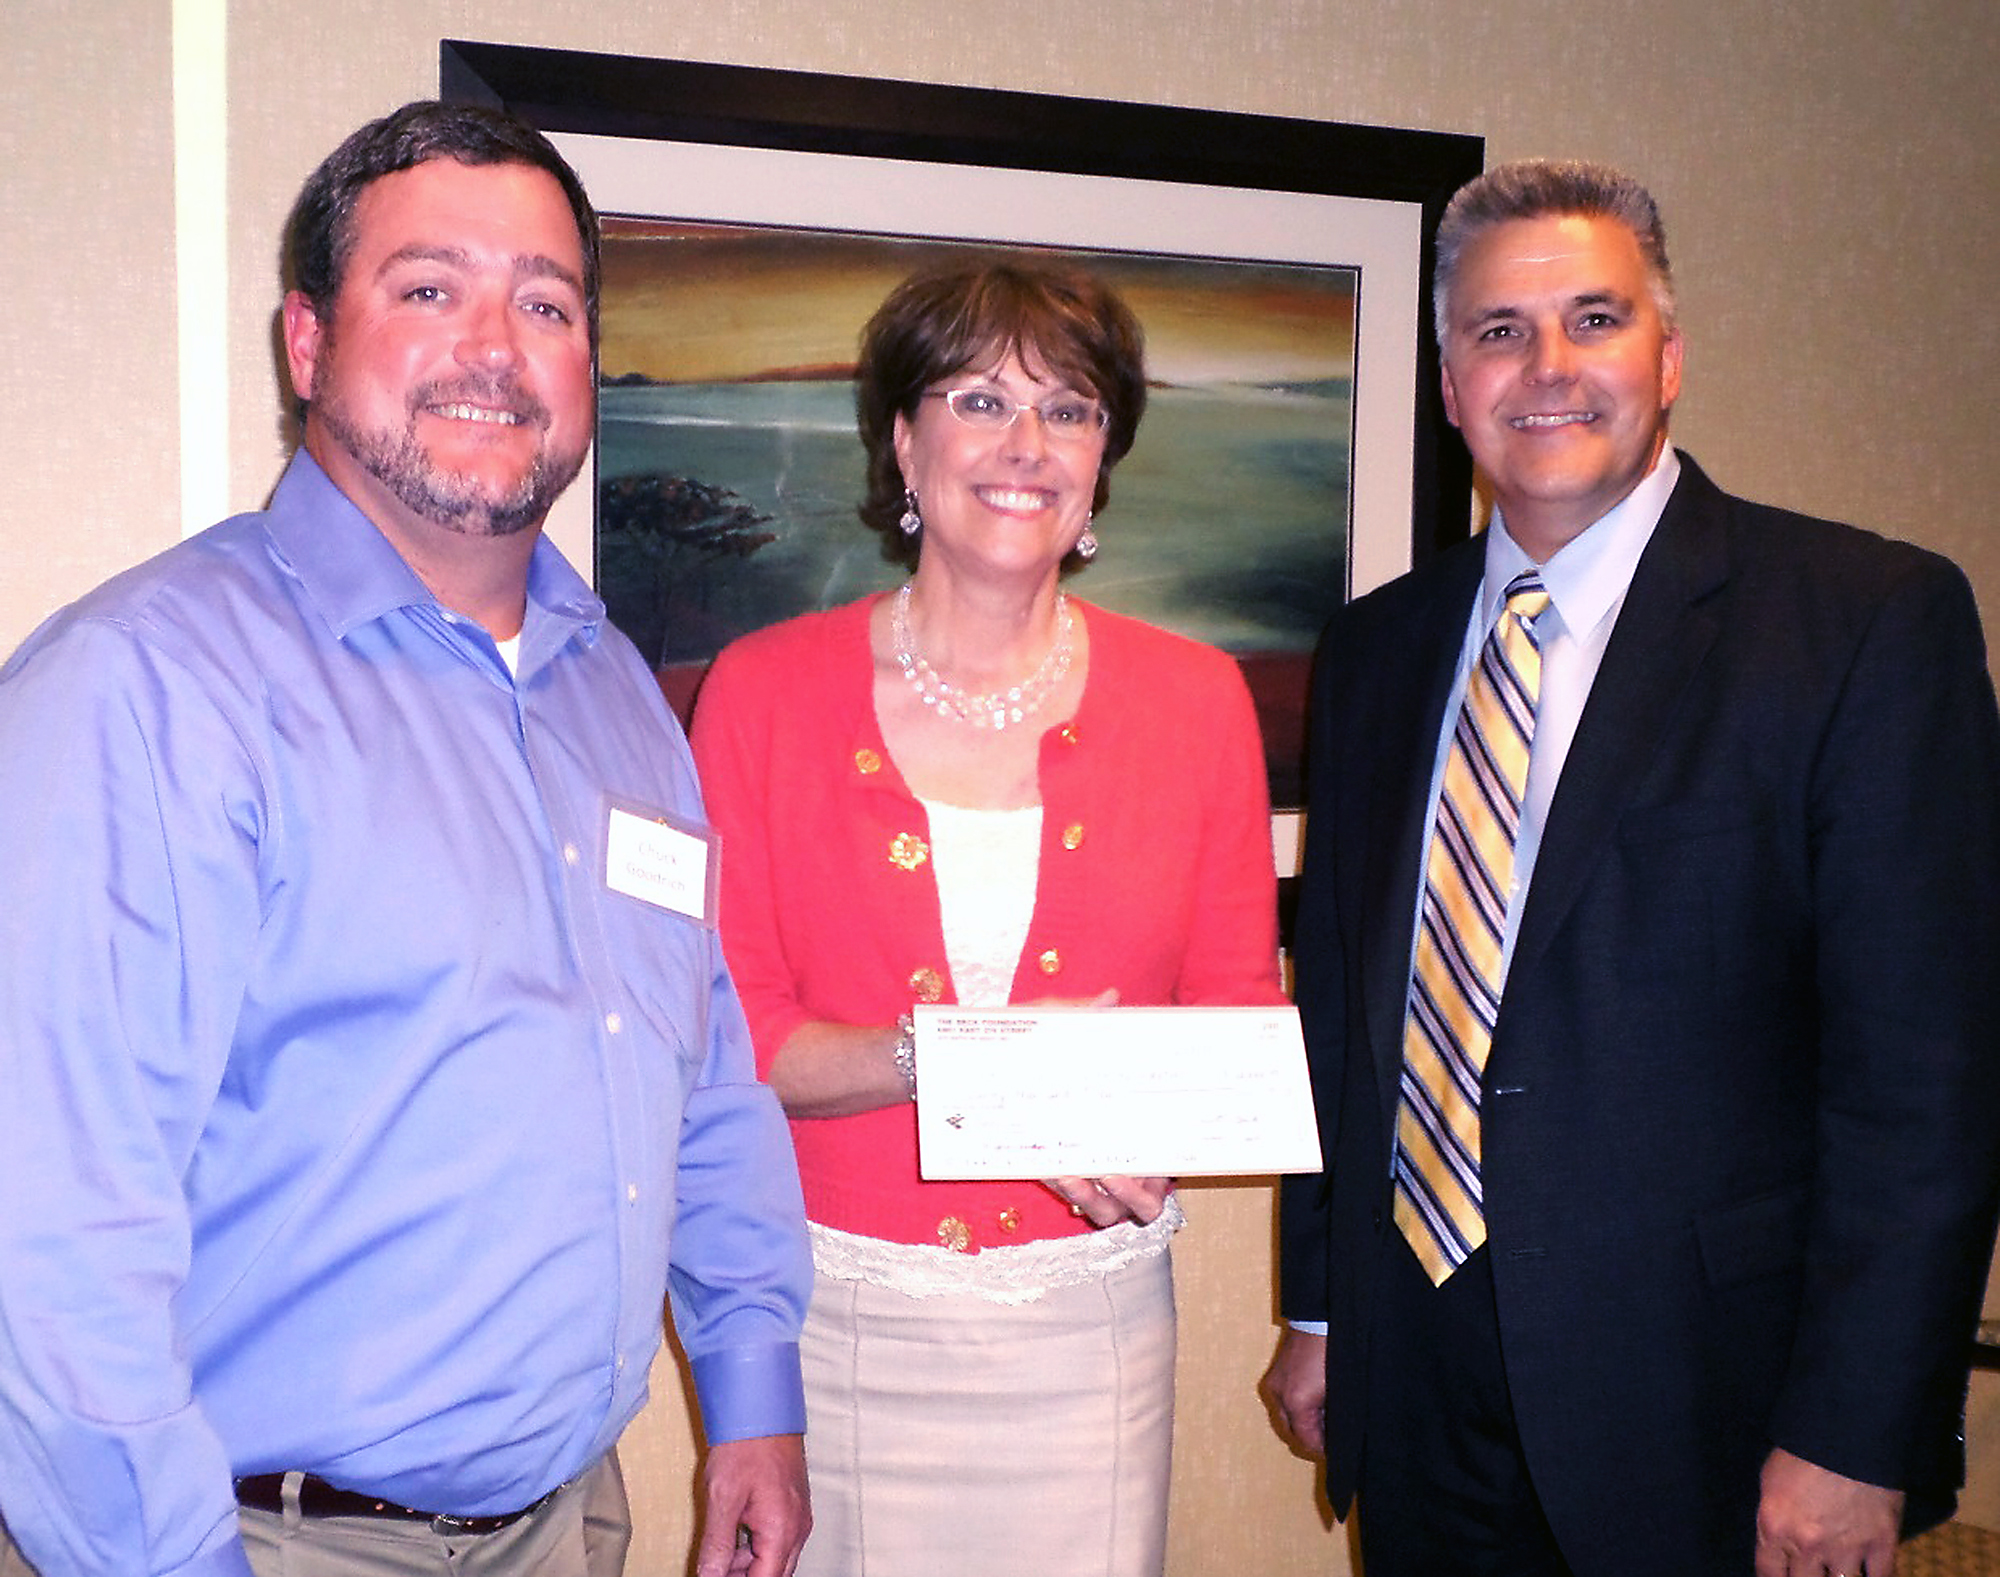 From left: Chuck Goodrich, Riverview Health Foundation board of directors chairman; Trish Oman, Riverview Health Foundation executive director; and Bruce Kettler, Beck’s Hybrids director of public relations. The Beck Foundation presented a check for $20,000 to assist with the purchase of a new large-bore MRI. (Submitted photo)